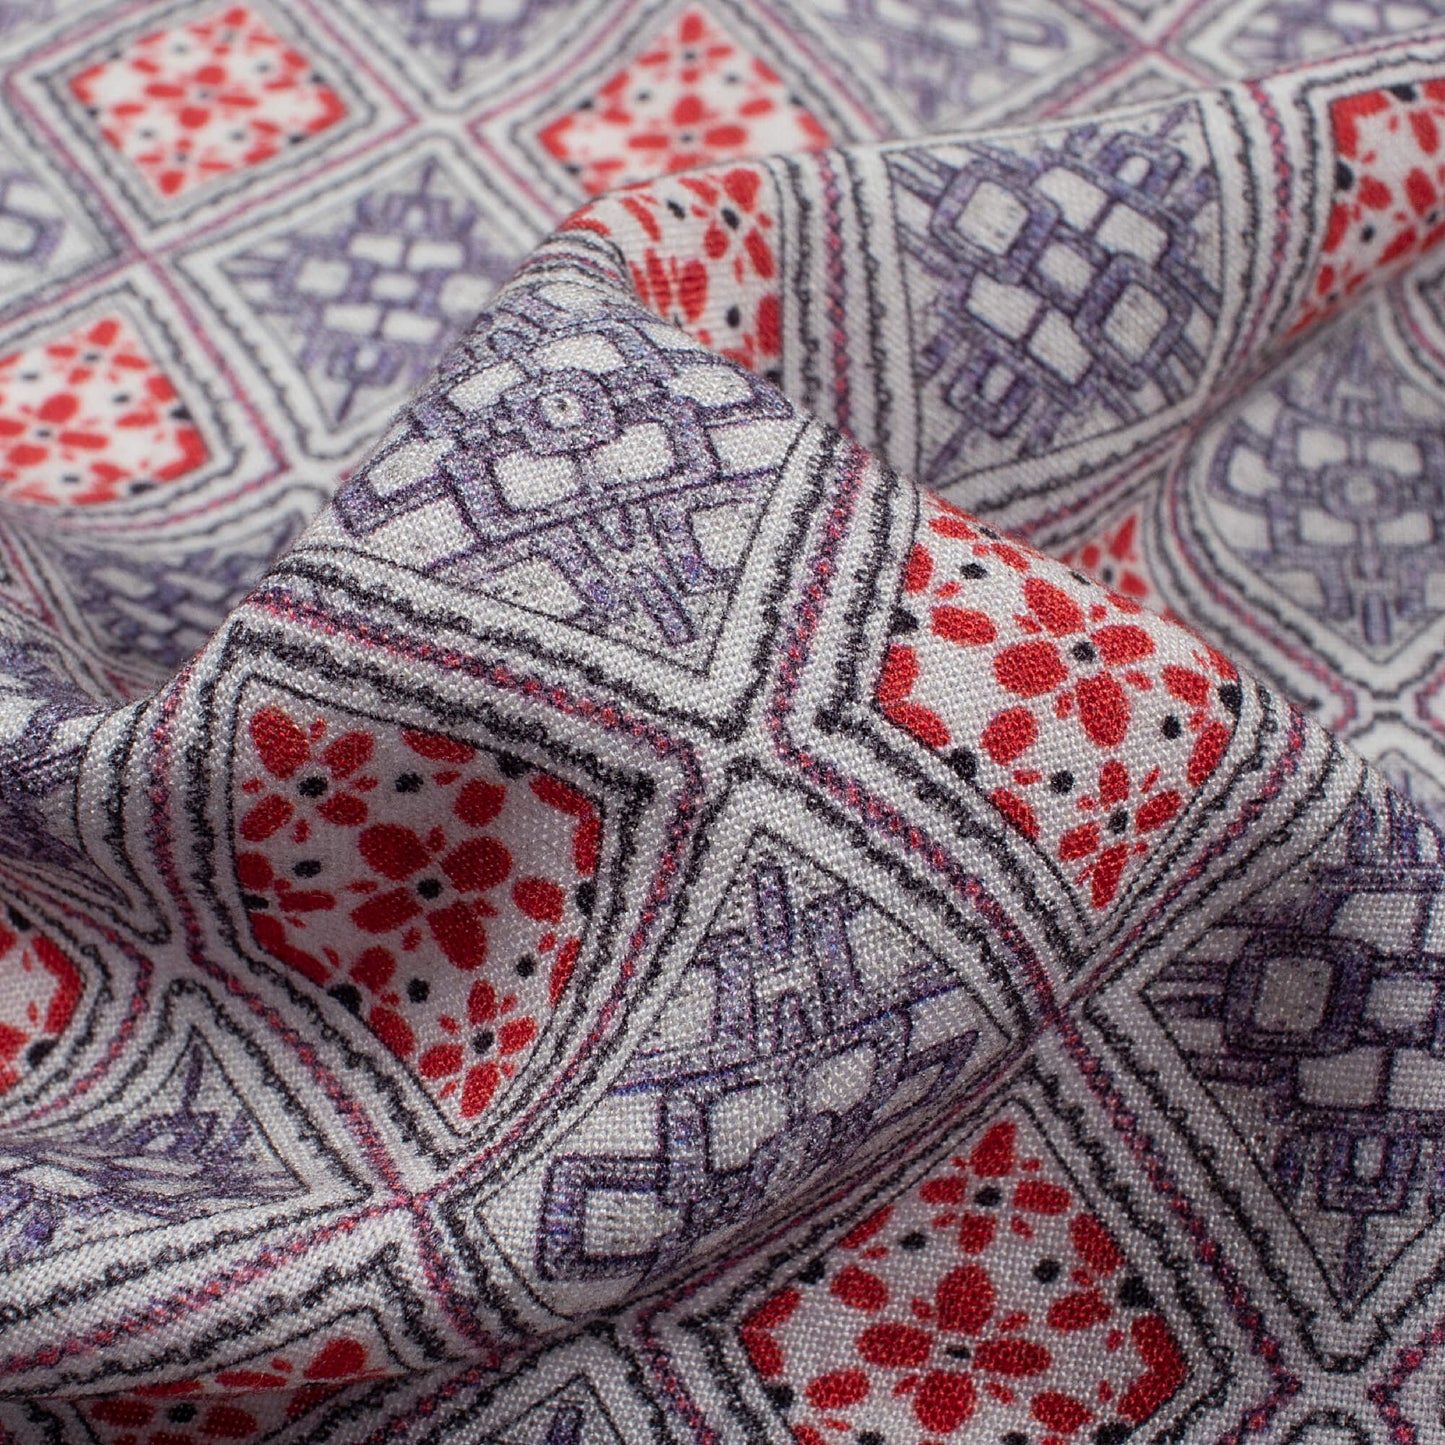 Vermilion Red And Blue Geometric Pattern Digital Print Viscose Rayon Fabric (Width 58 Inches)